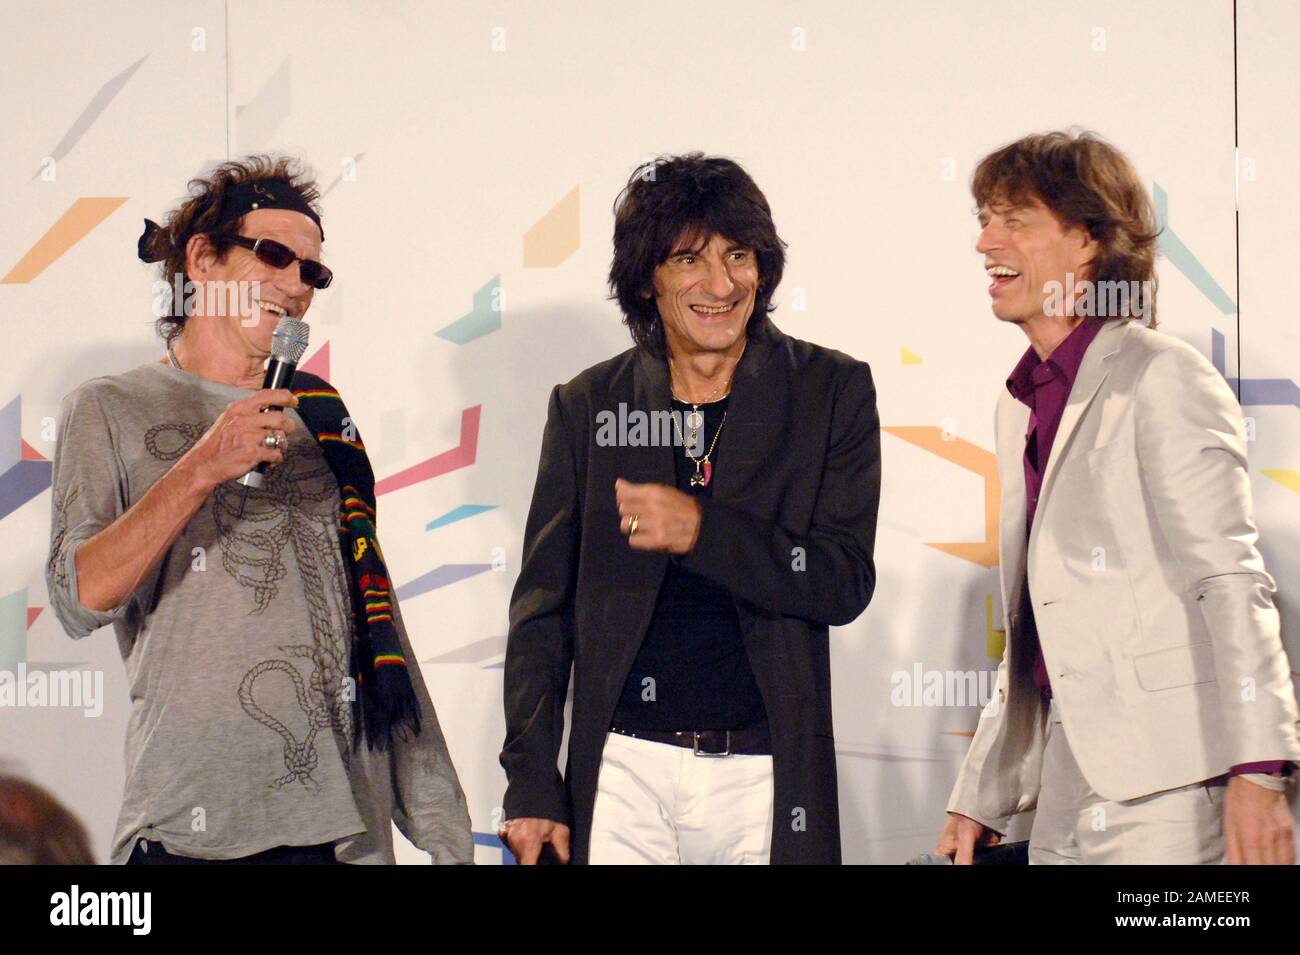 Milan Italy 10/07/2006 The Rolling Stones during the press conference before the concert : Mick Jagger, Ronnie Wood,  Keith Richards Stock Photo